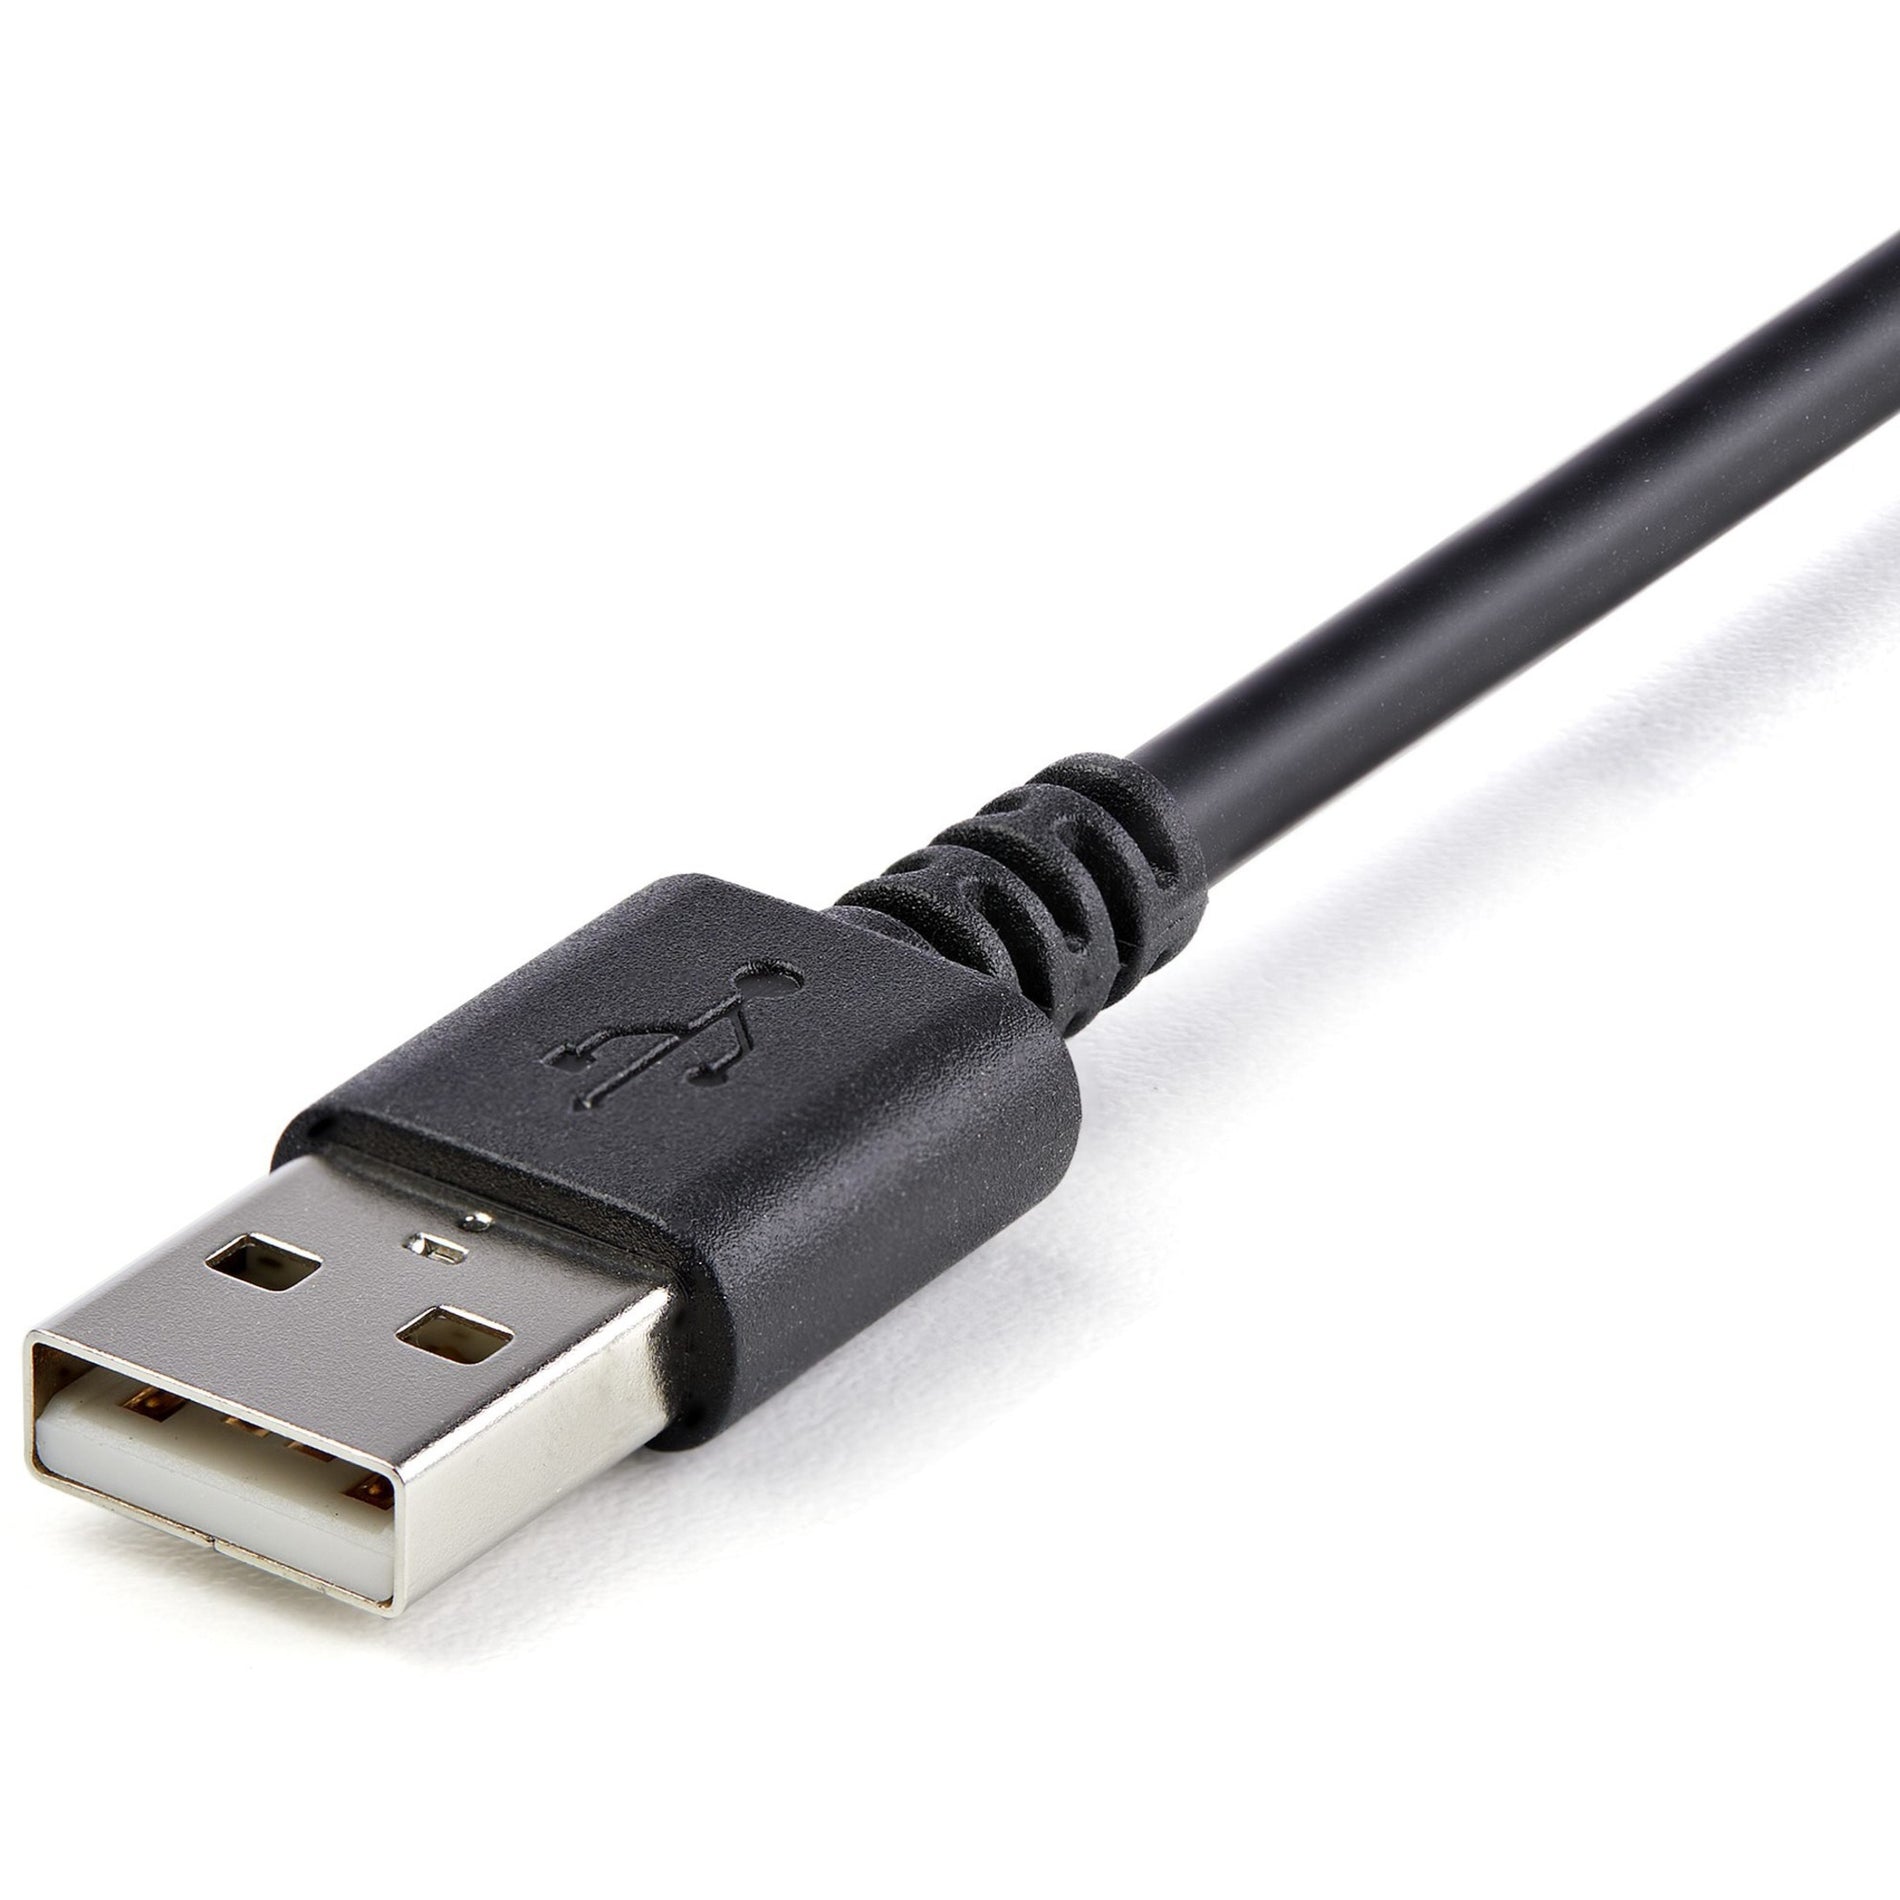 StarTech.com USBLT3MB Sync/Charge Lightning/USB Data Transfer Cable, 9.84 ft, MFI Certified, Reversible, Black